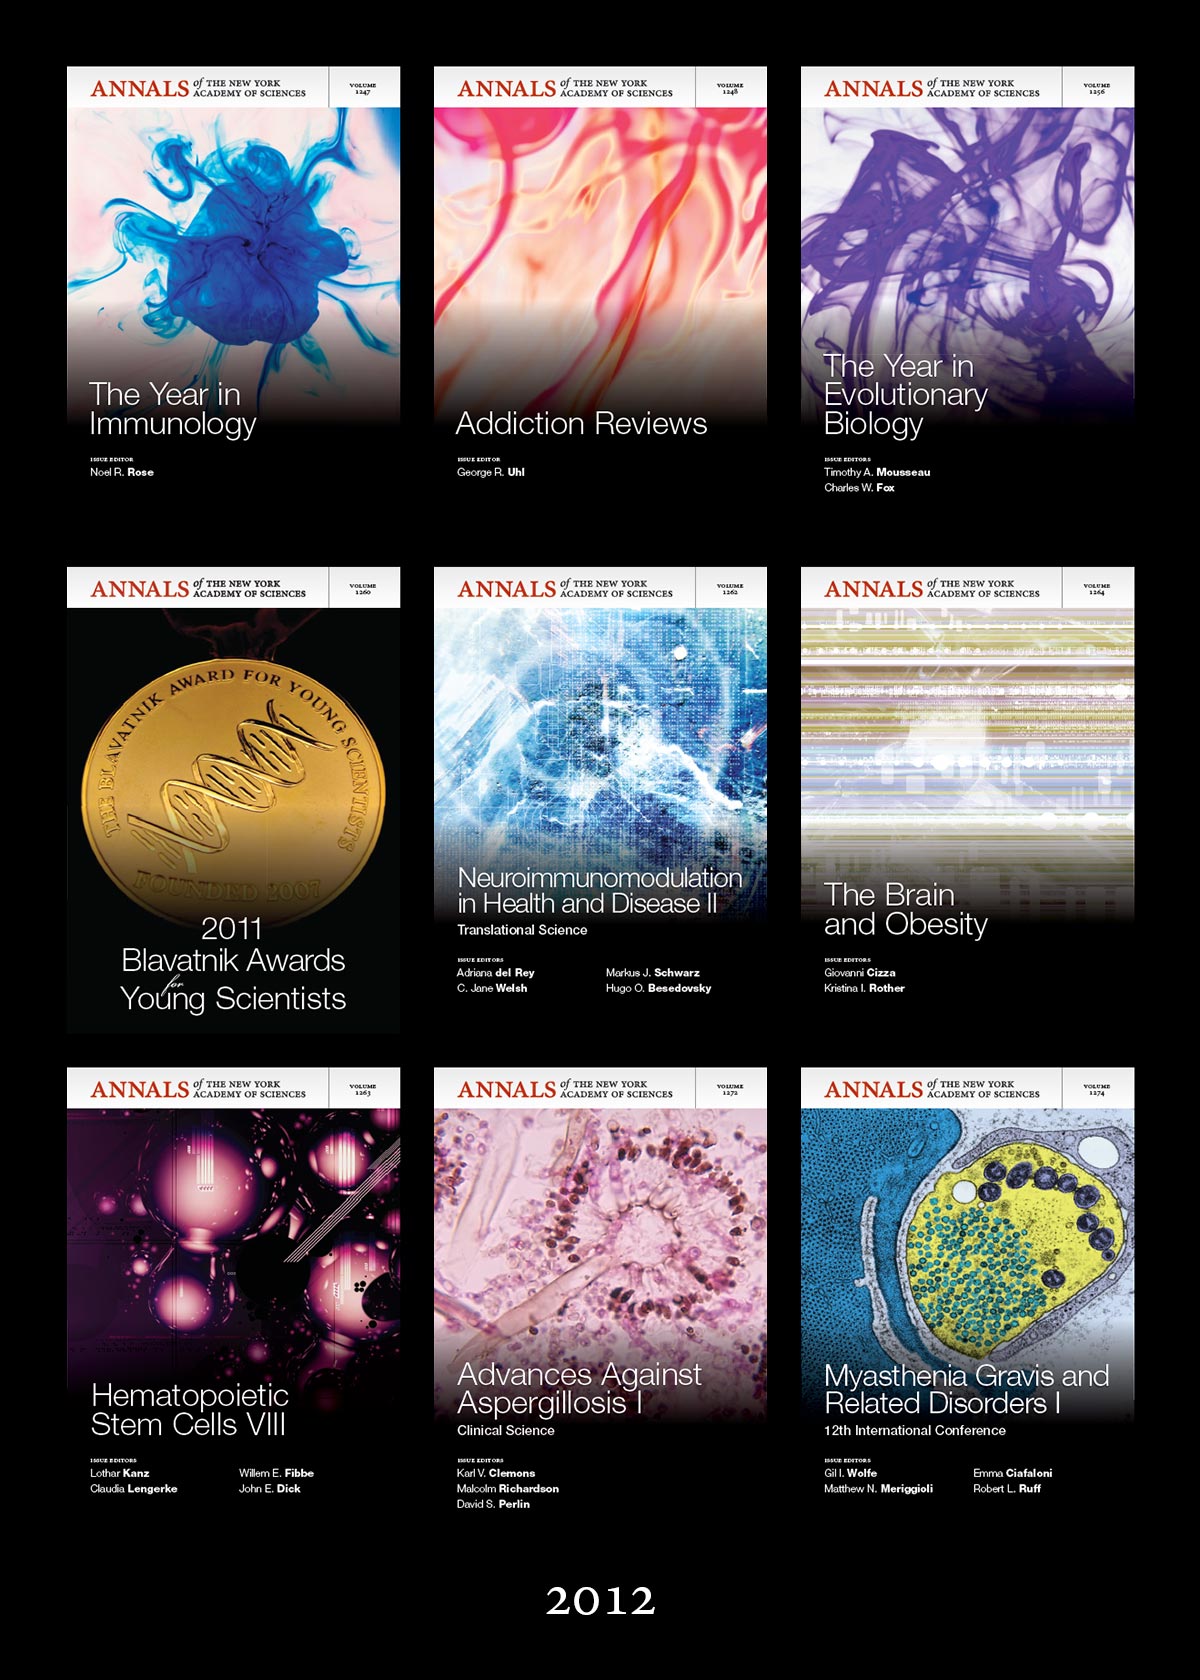 2012 covers